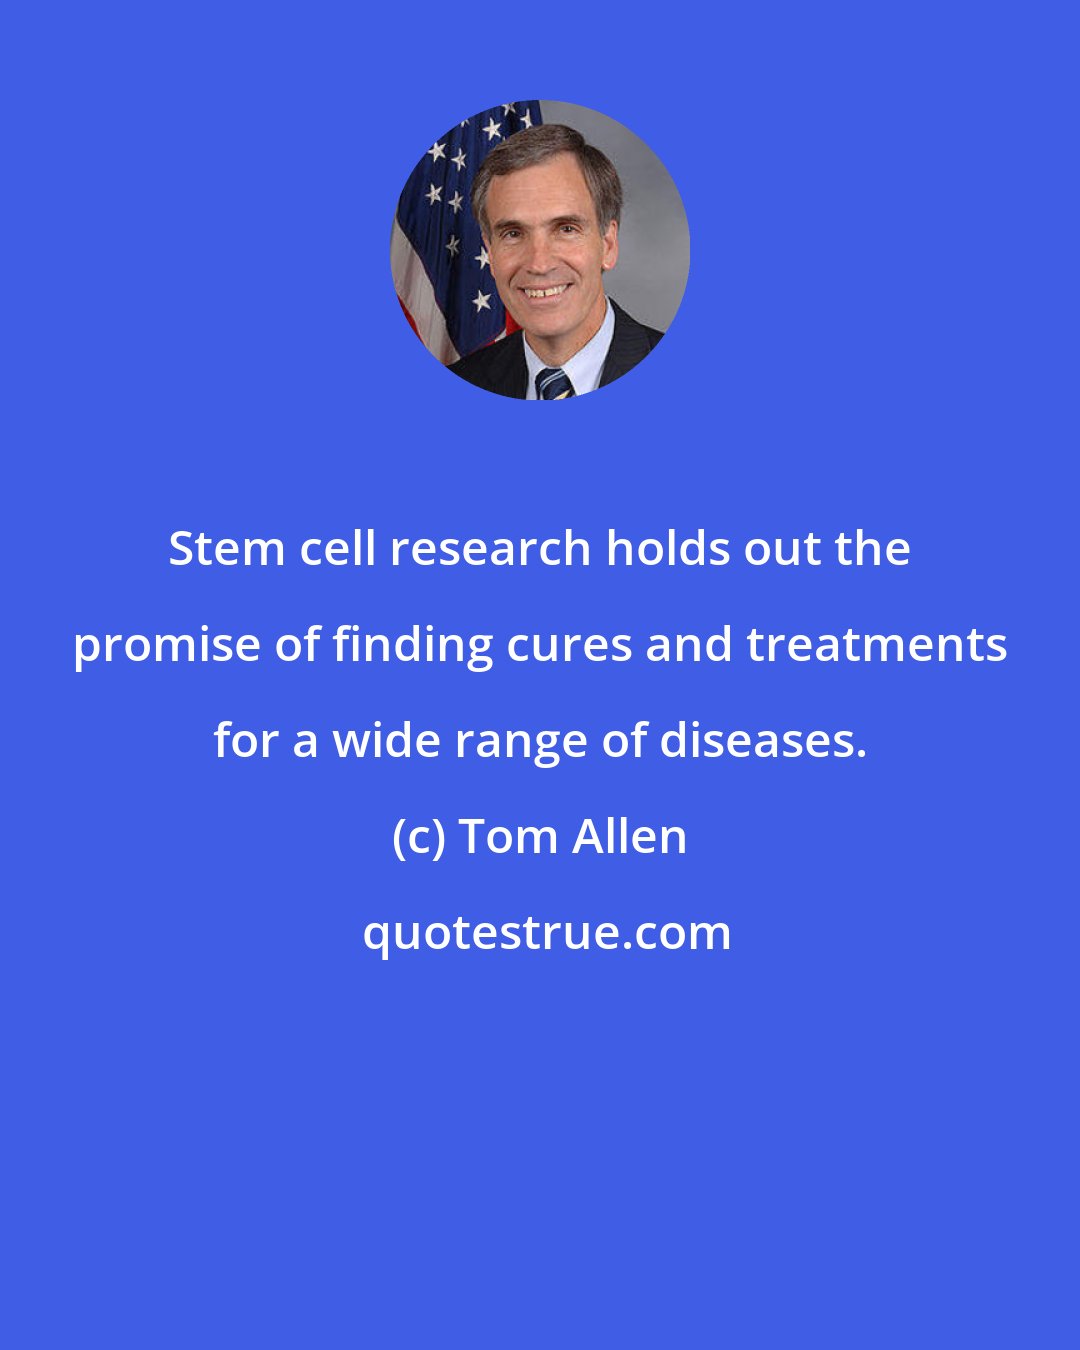 Tom Allen: Stem cell research holds out the promise of finding cures and treatments for a wide range of diseases.